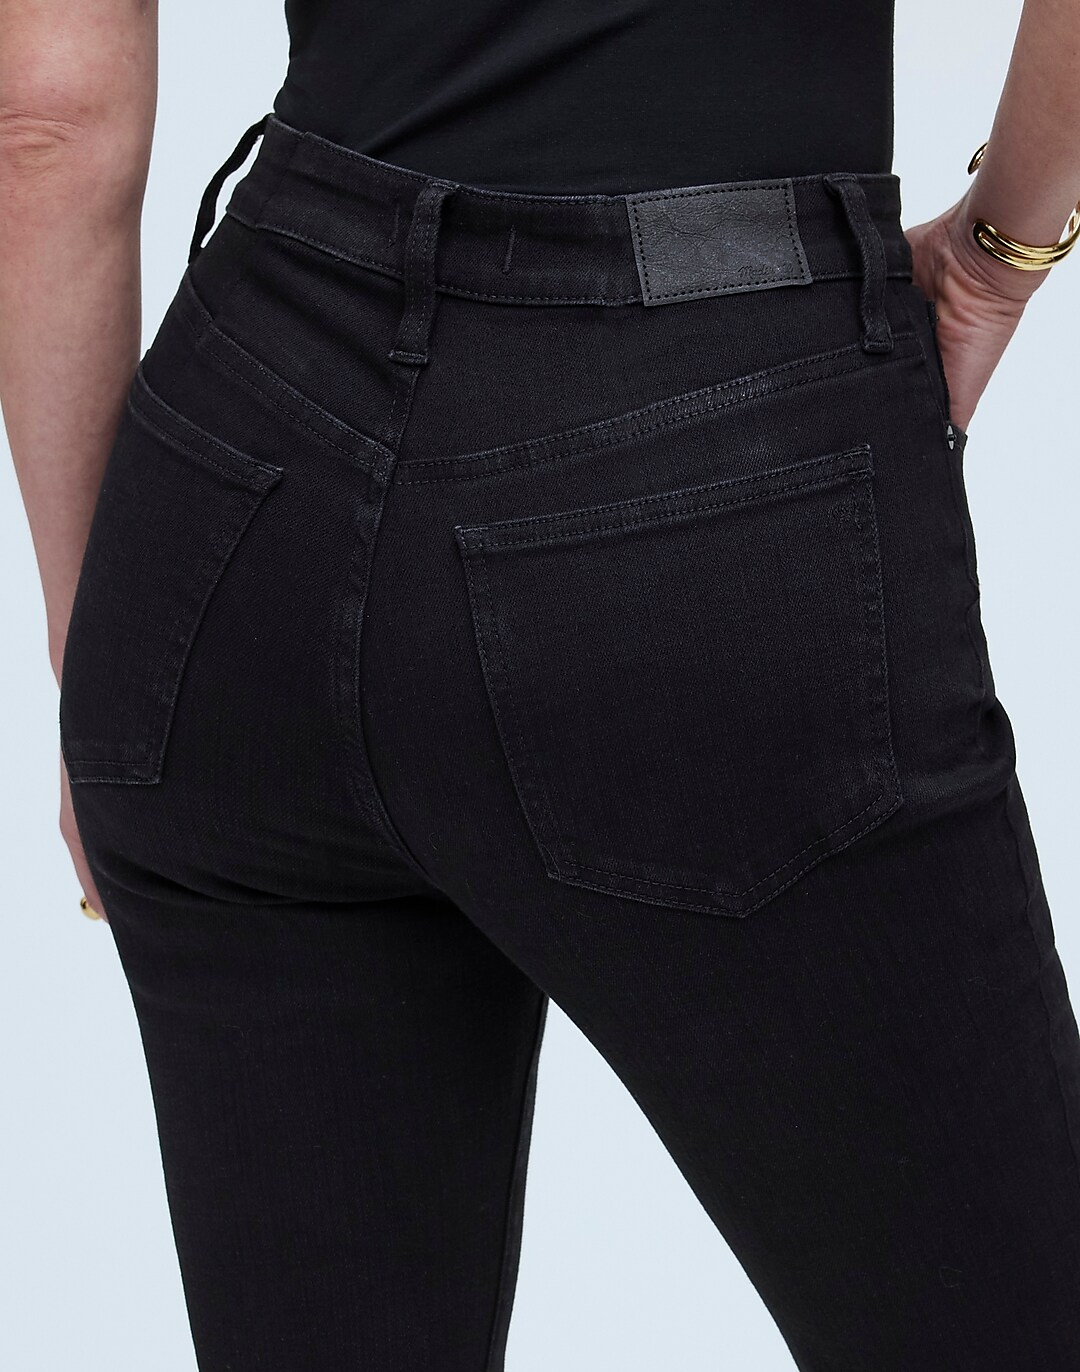 Curvy Kick Out Crop Jeans in Black Rinse Wash